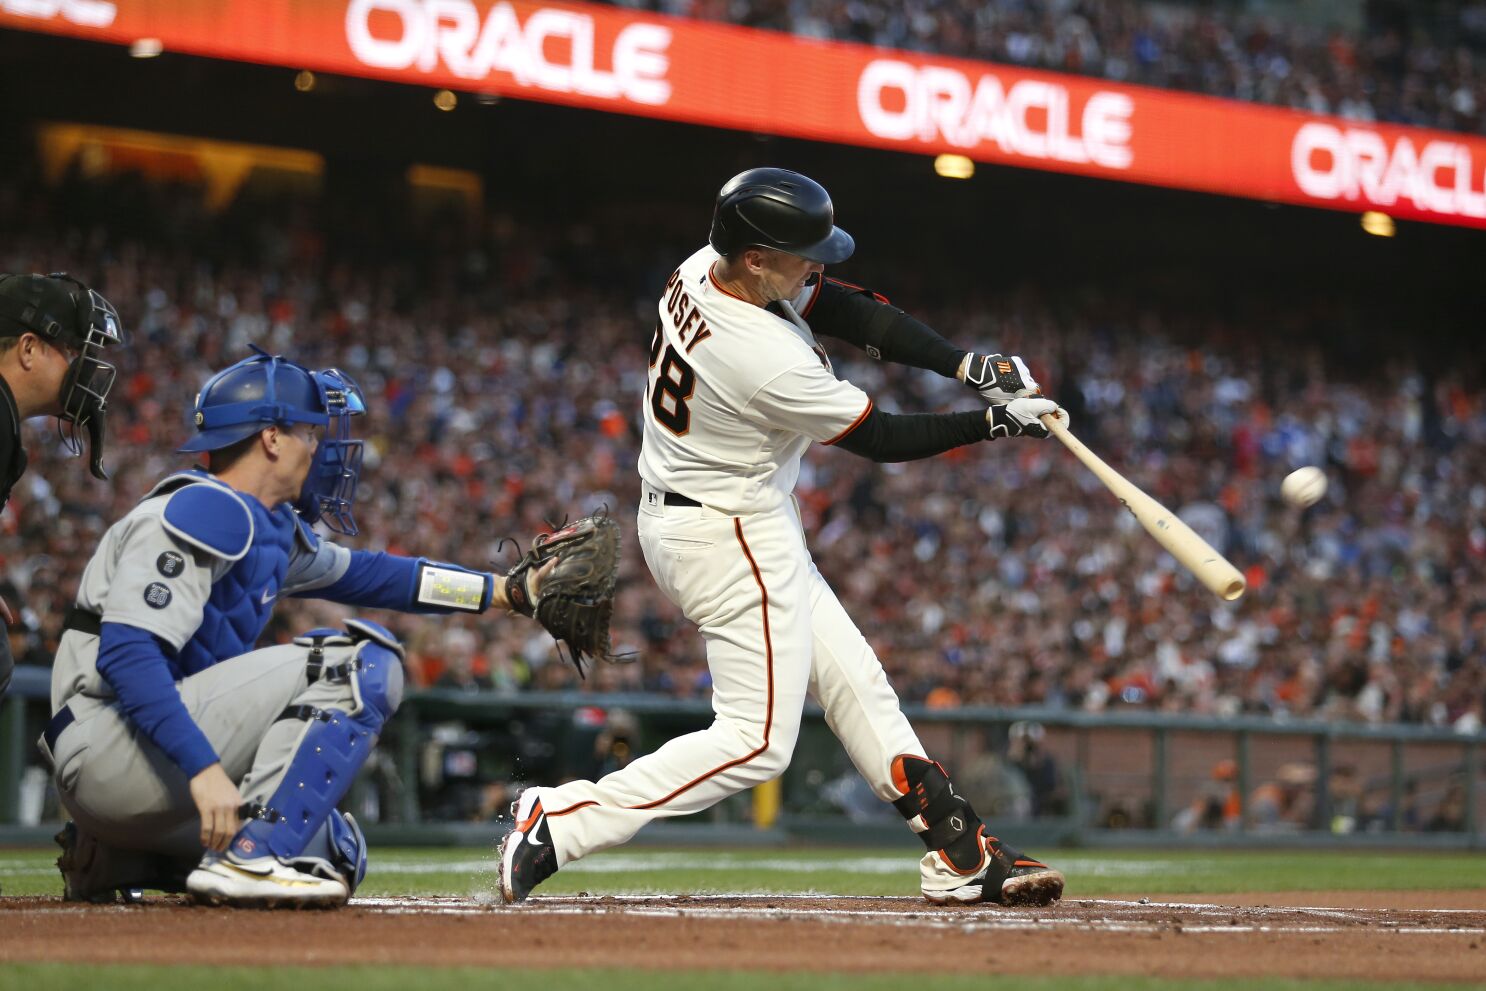 I'm walking off this field': Retiring Giants legend Buster Posey